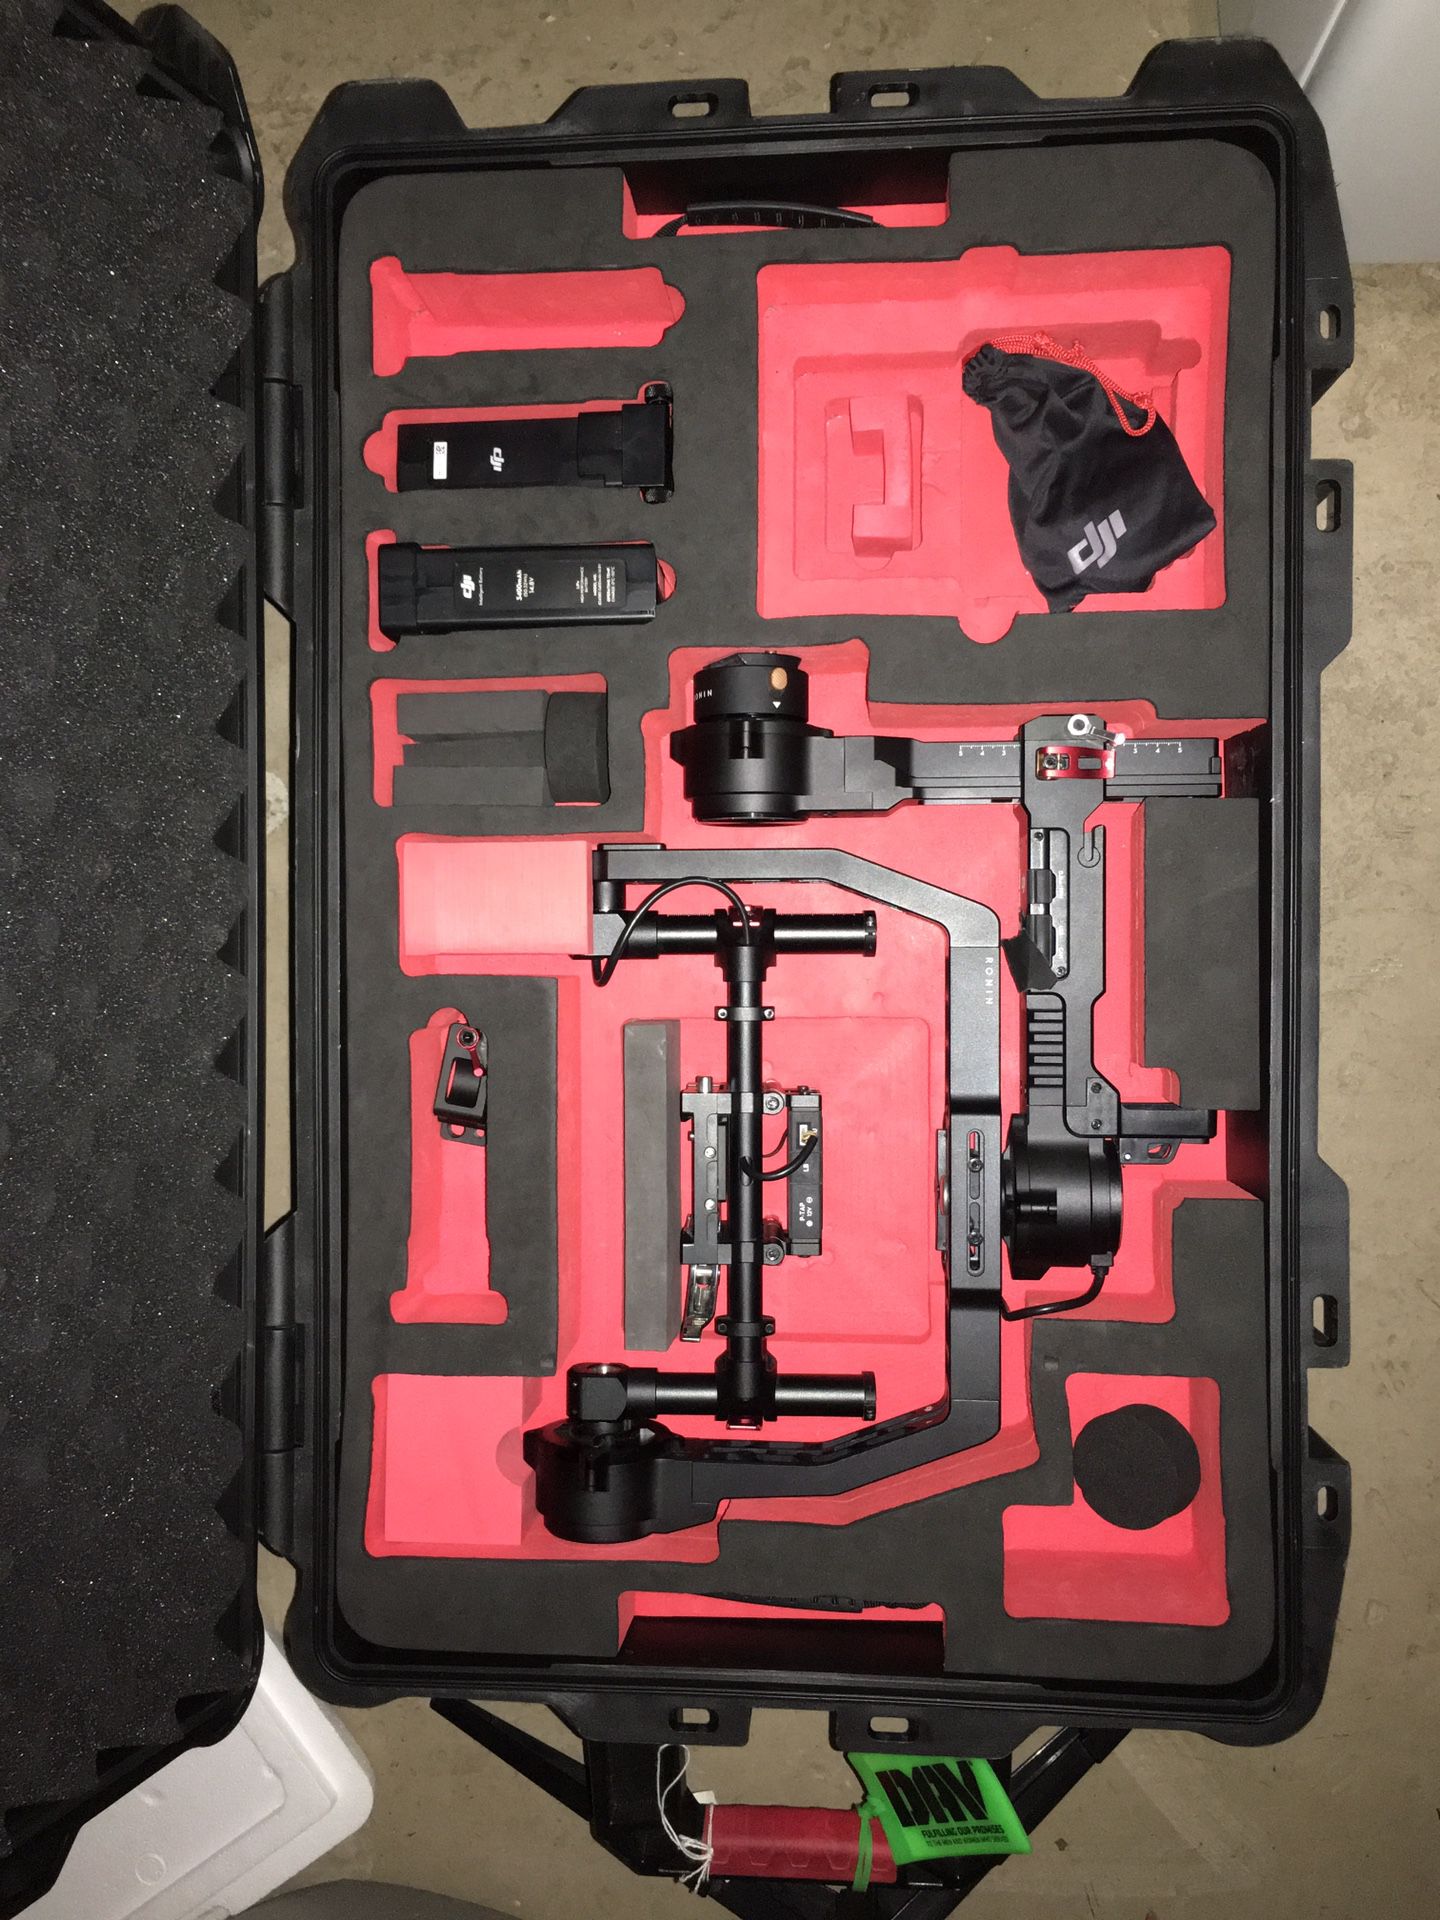 DJI Ronin 1 original 3 axis gimbal stabilizer - for heavy and lightweight camera